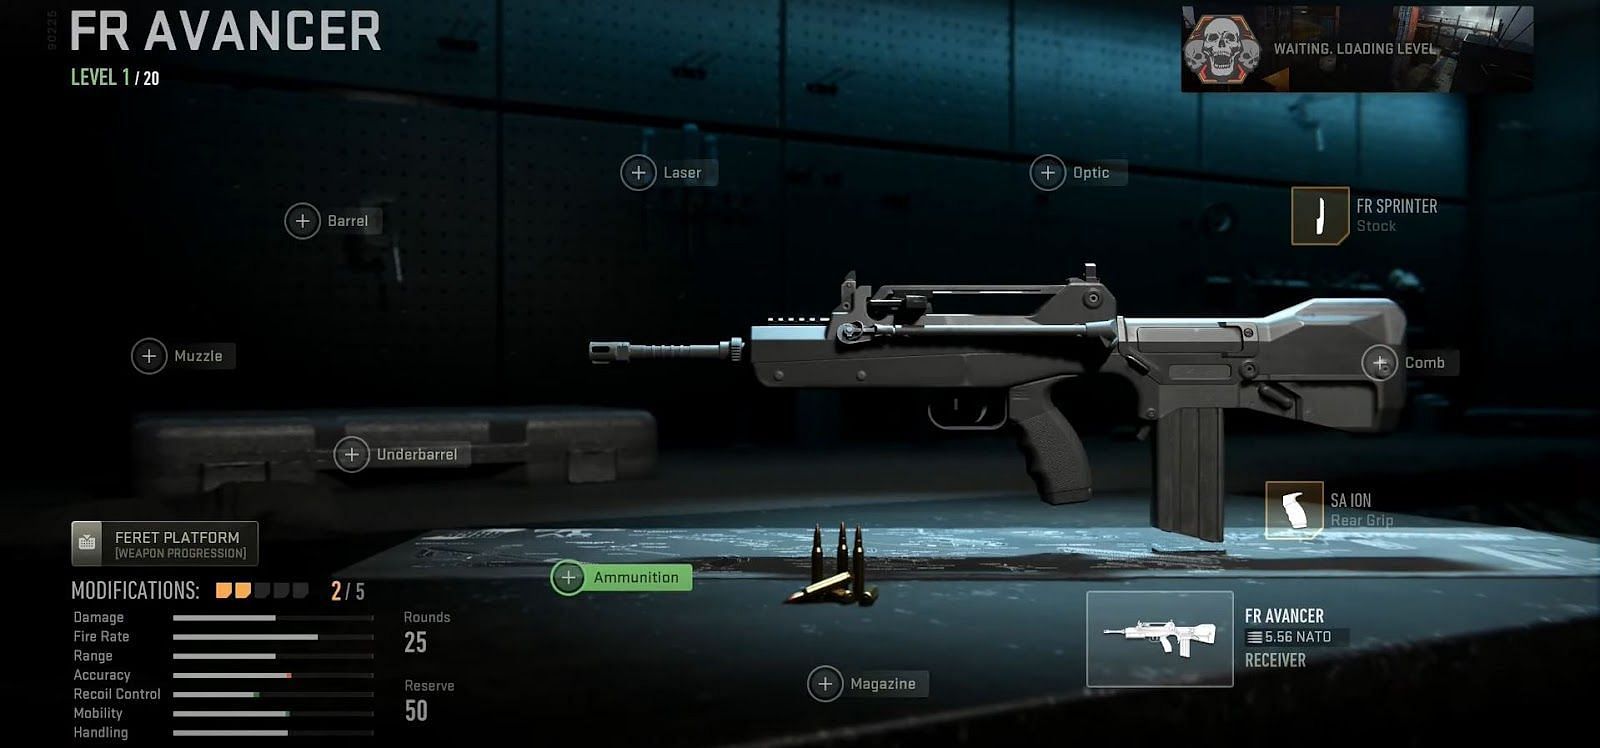 What is the FAMAS called in Modern Warfare 2?